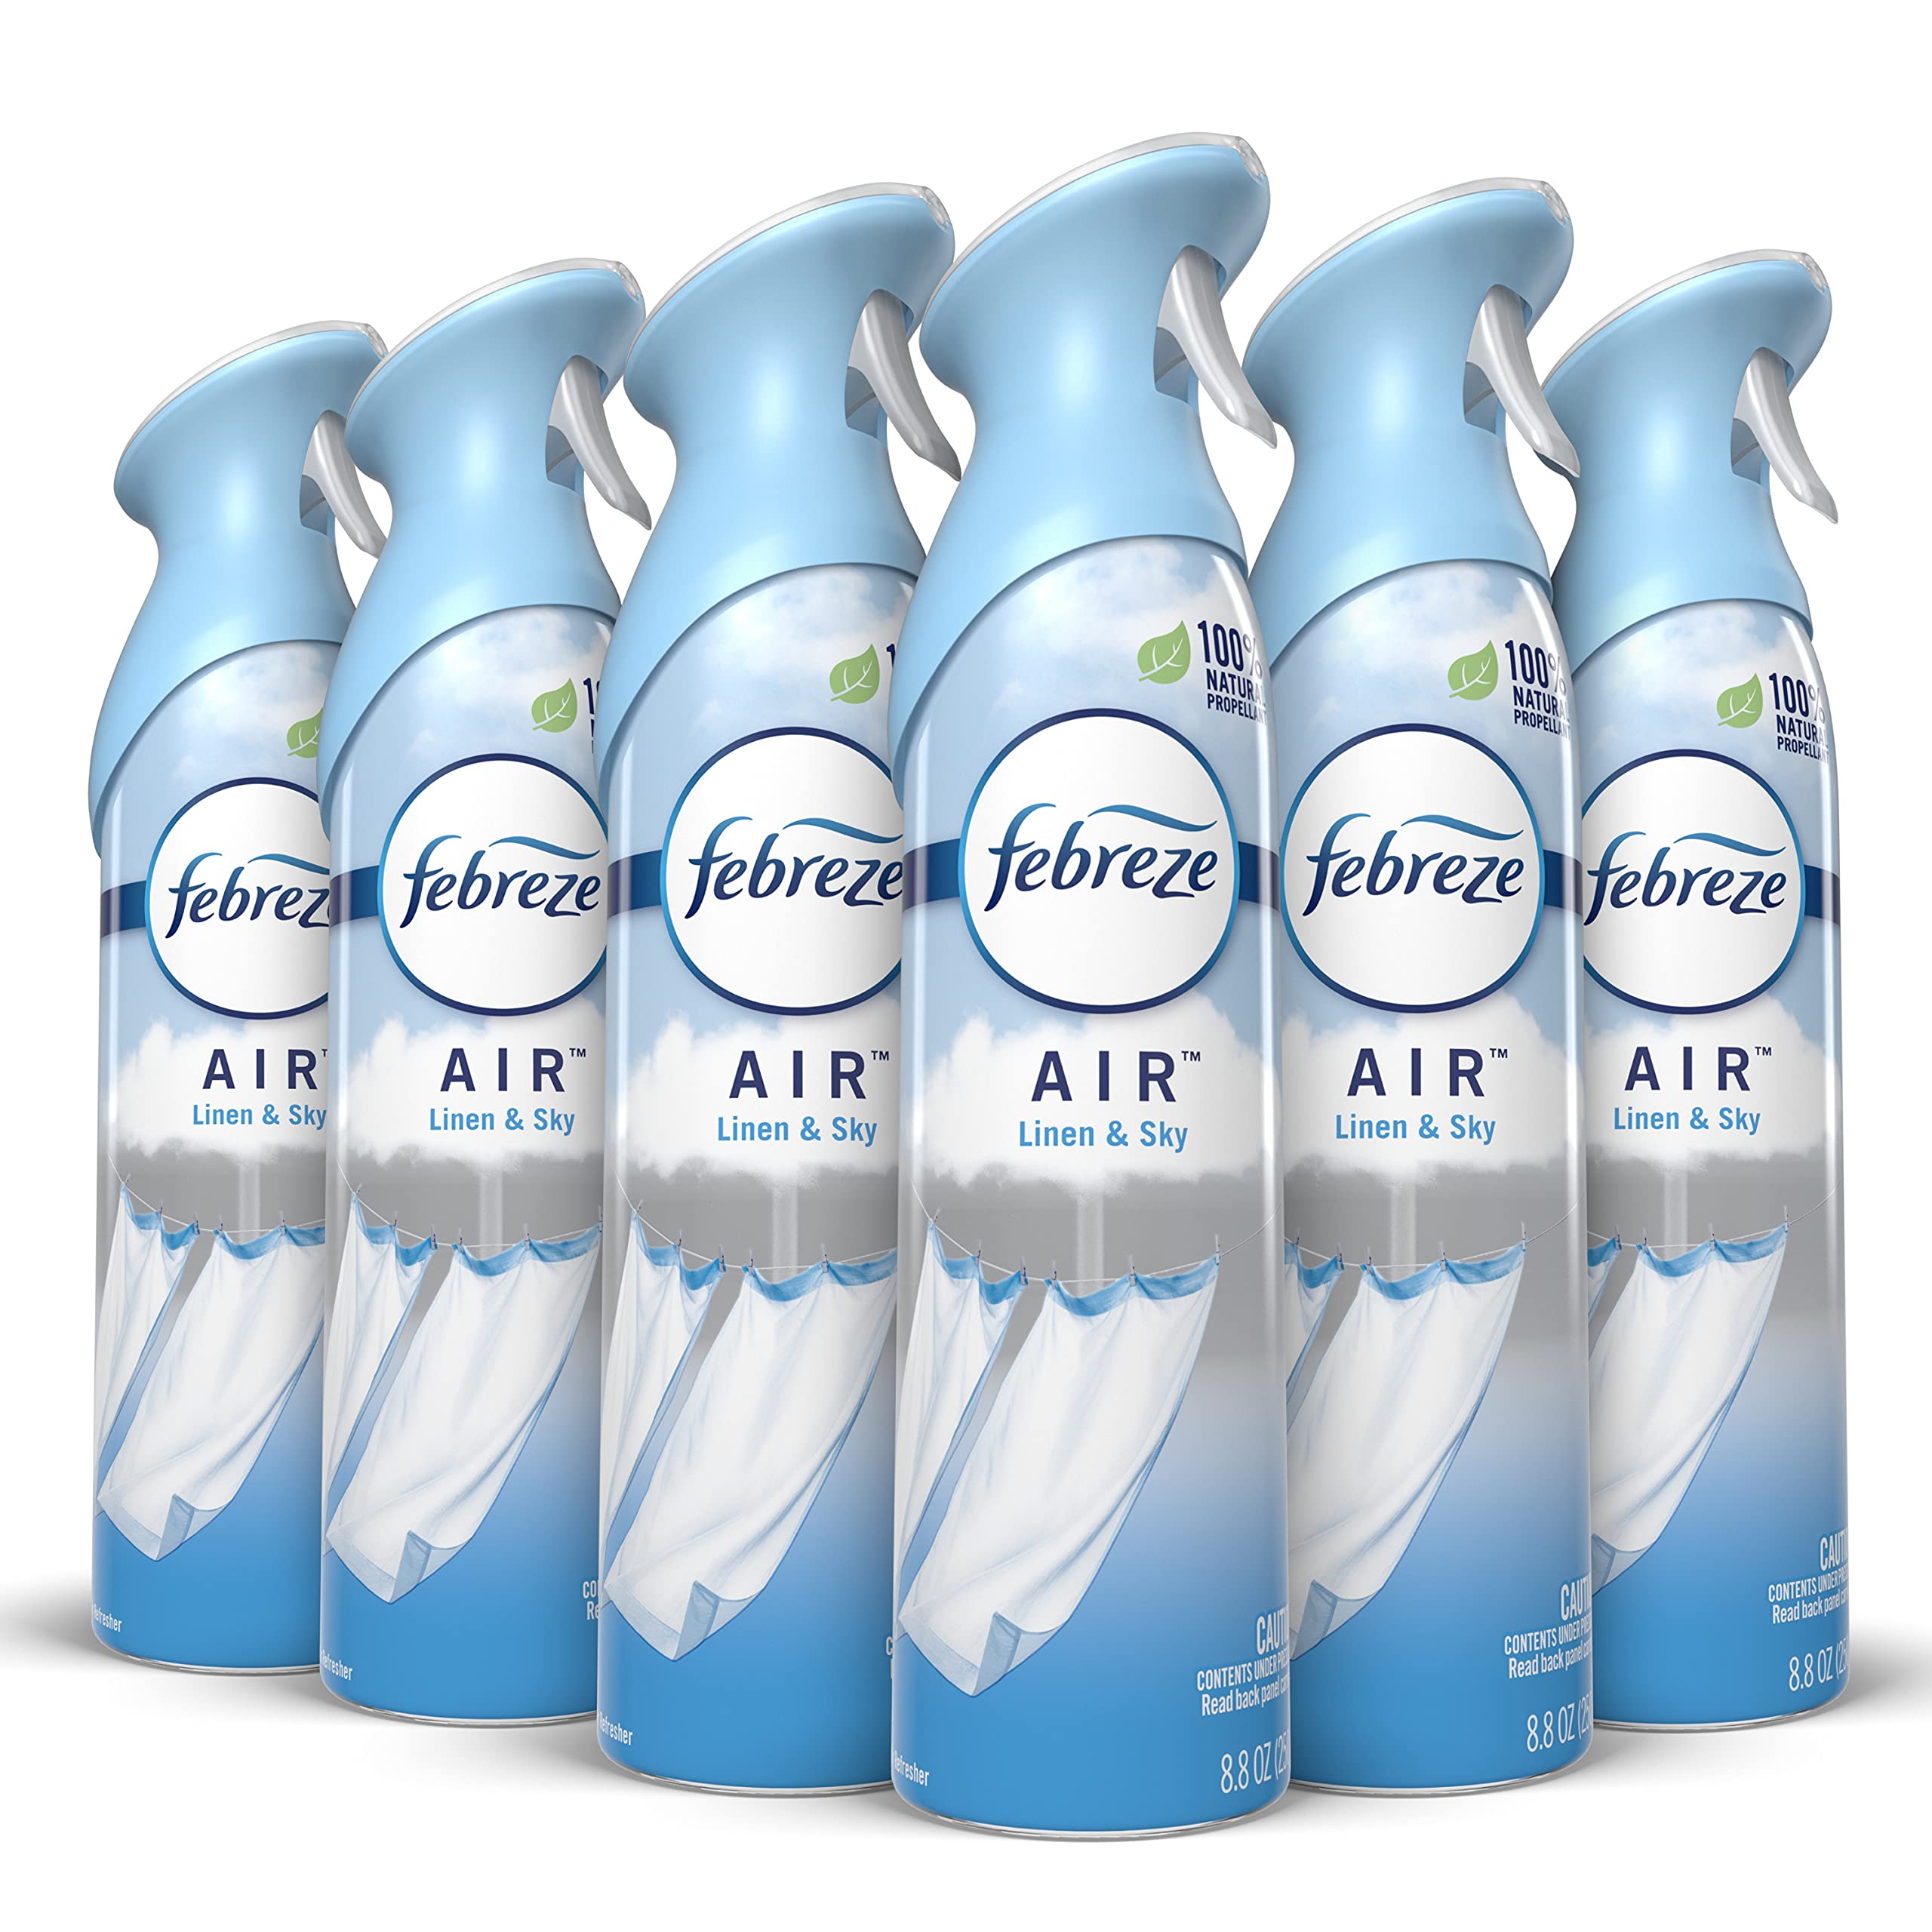 6-Pack 8.8-Oz Febreze Air Freshener/Odor Spray (Linen & Sky) + $5 Amazon Credit $16.30 w/ S&S & More + Free Shipping w/ Prime or on $35+